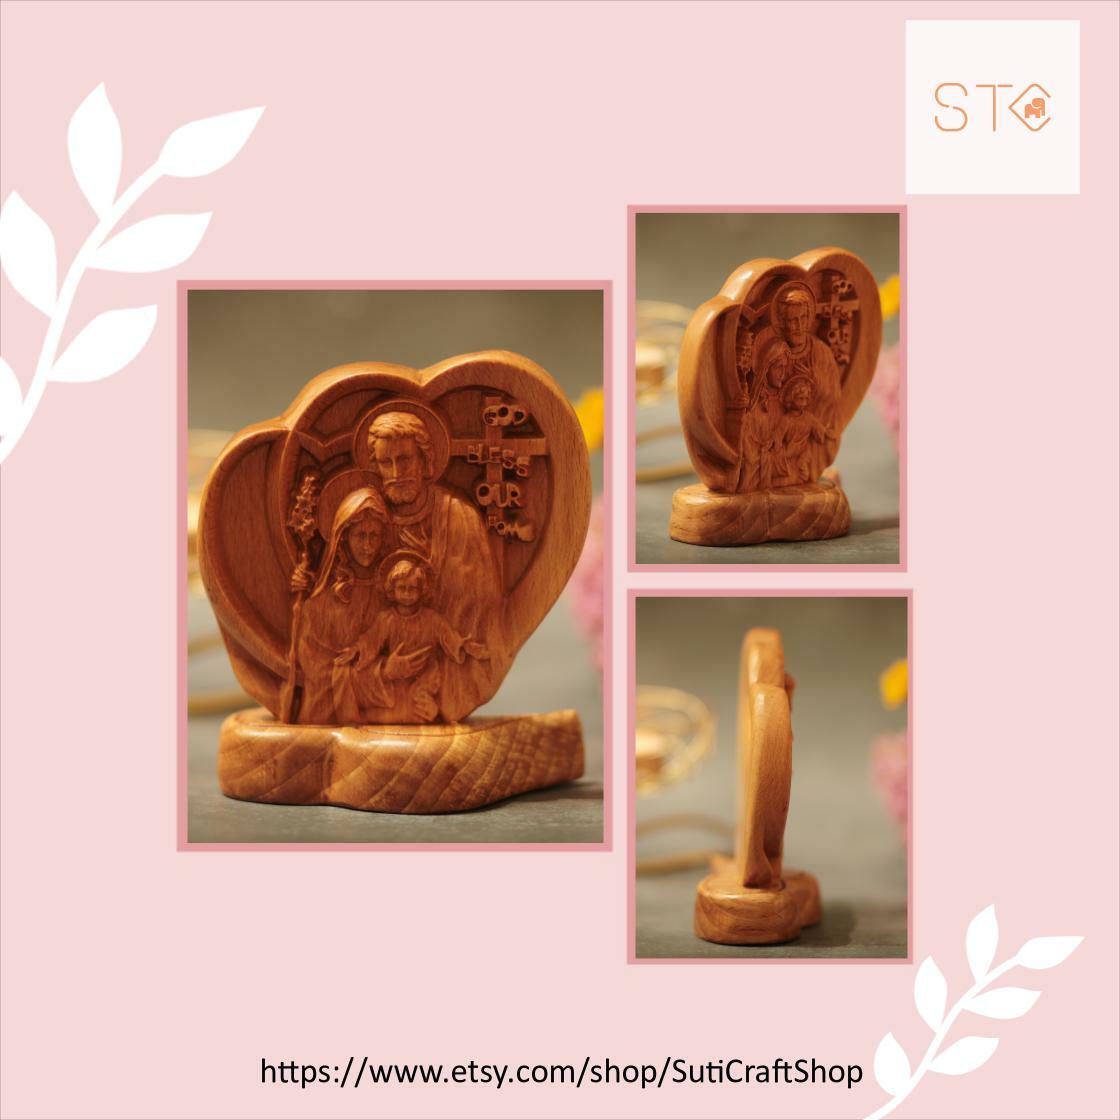 Awesome! Amazing! Our latest arrival. Holy Family Desktop Figurine, Catholic Statue, Wooden Religious Gifts,Handmade Gift, New Home Gift,Home Decor, Christian Gifts, Wood Art at $59.90. 
suticraftshop.etsy.com/listing/154385…
#ChristianGift #HolyFamilyStatue